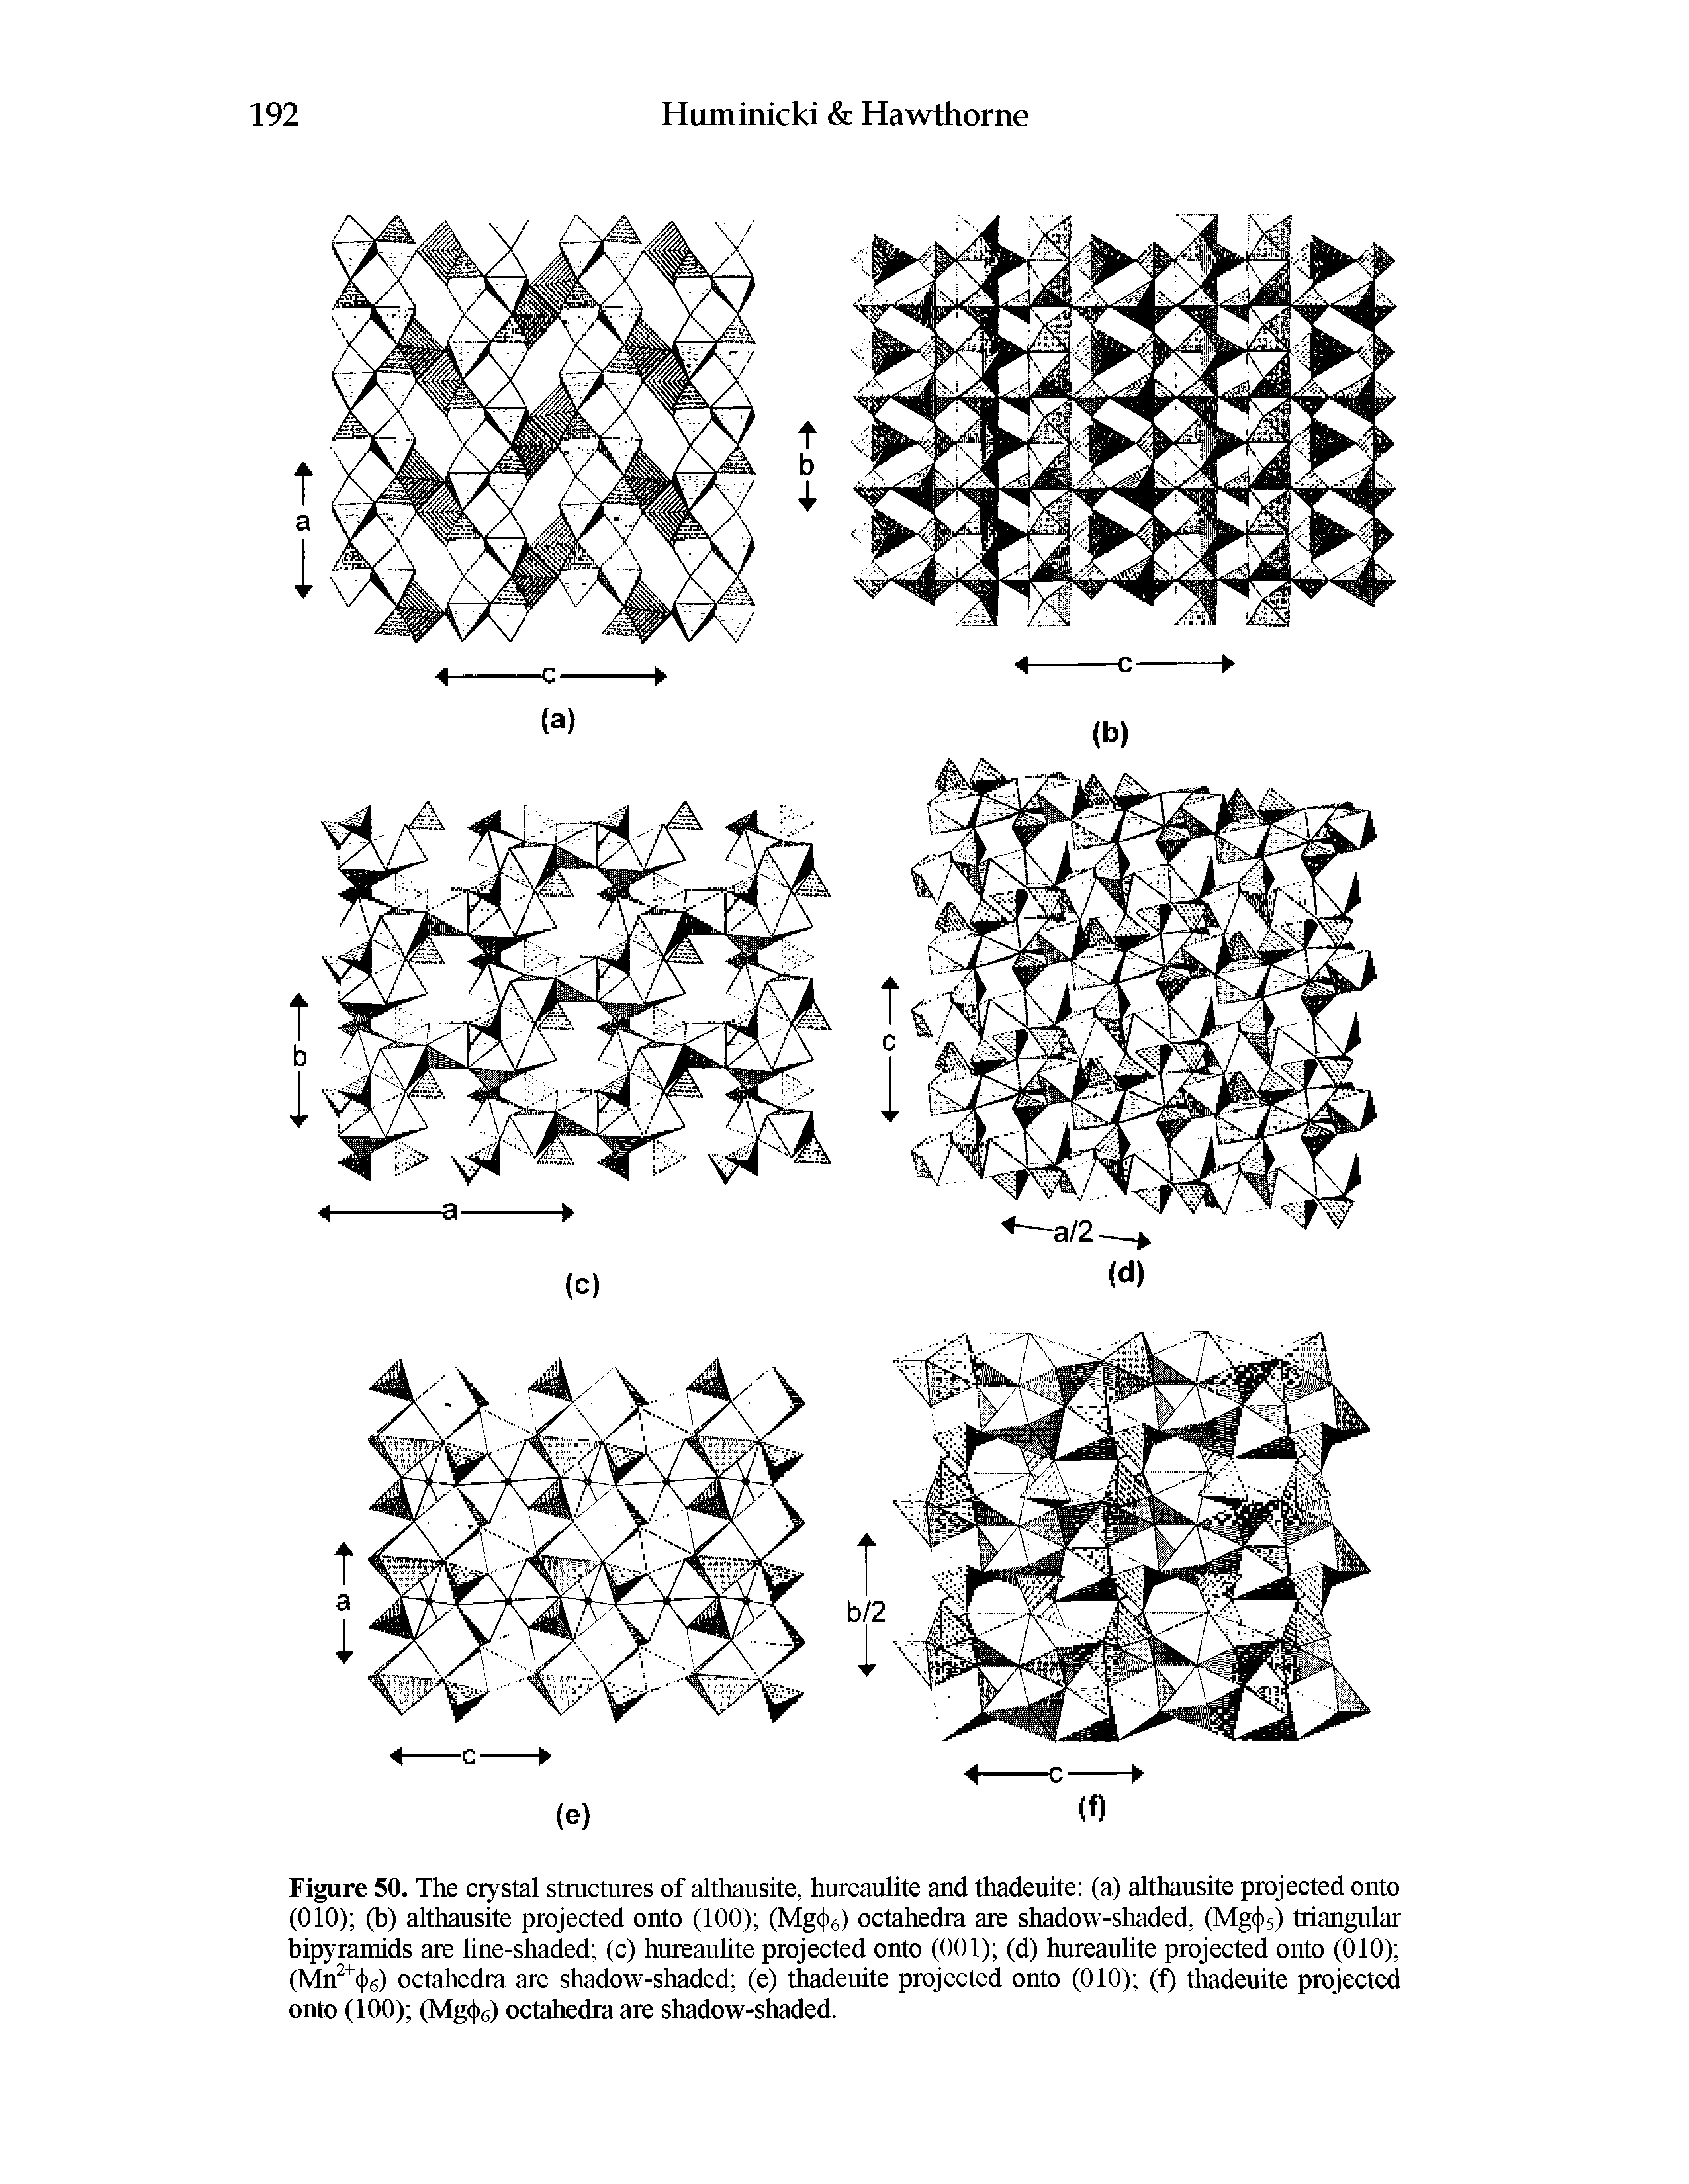 Figure 50. The crystal structures of althausite, hureaulite and thadeuite (a) althausite projected onto (010) (b) althausite projected onto (100) (Mgc )6) octahedra are shadow-shaded, (Mg( )5) triangular bipyramids are line-shaded (c) hureaulite projected onto (001) (d) hureaulite projected onto (010) (Mn ( )6) octahedra are shadow-shaded (e) thadeuite projected onto (010) (f) thadeuite projected onto (100) (Mg(j)6) octahedra are shadow-shaded.